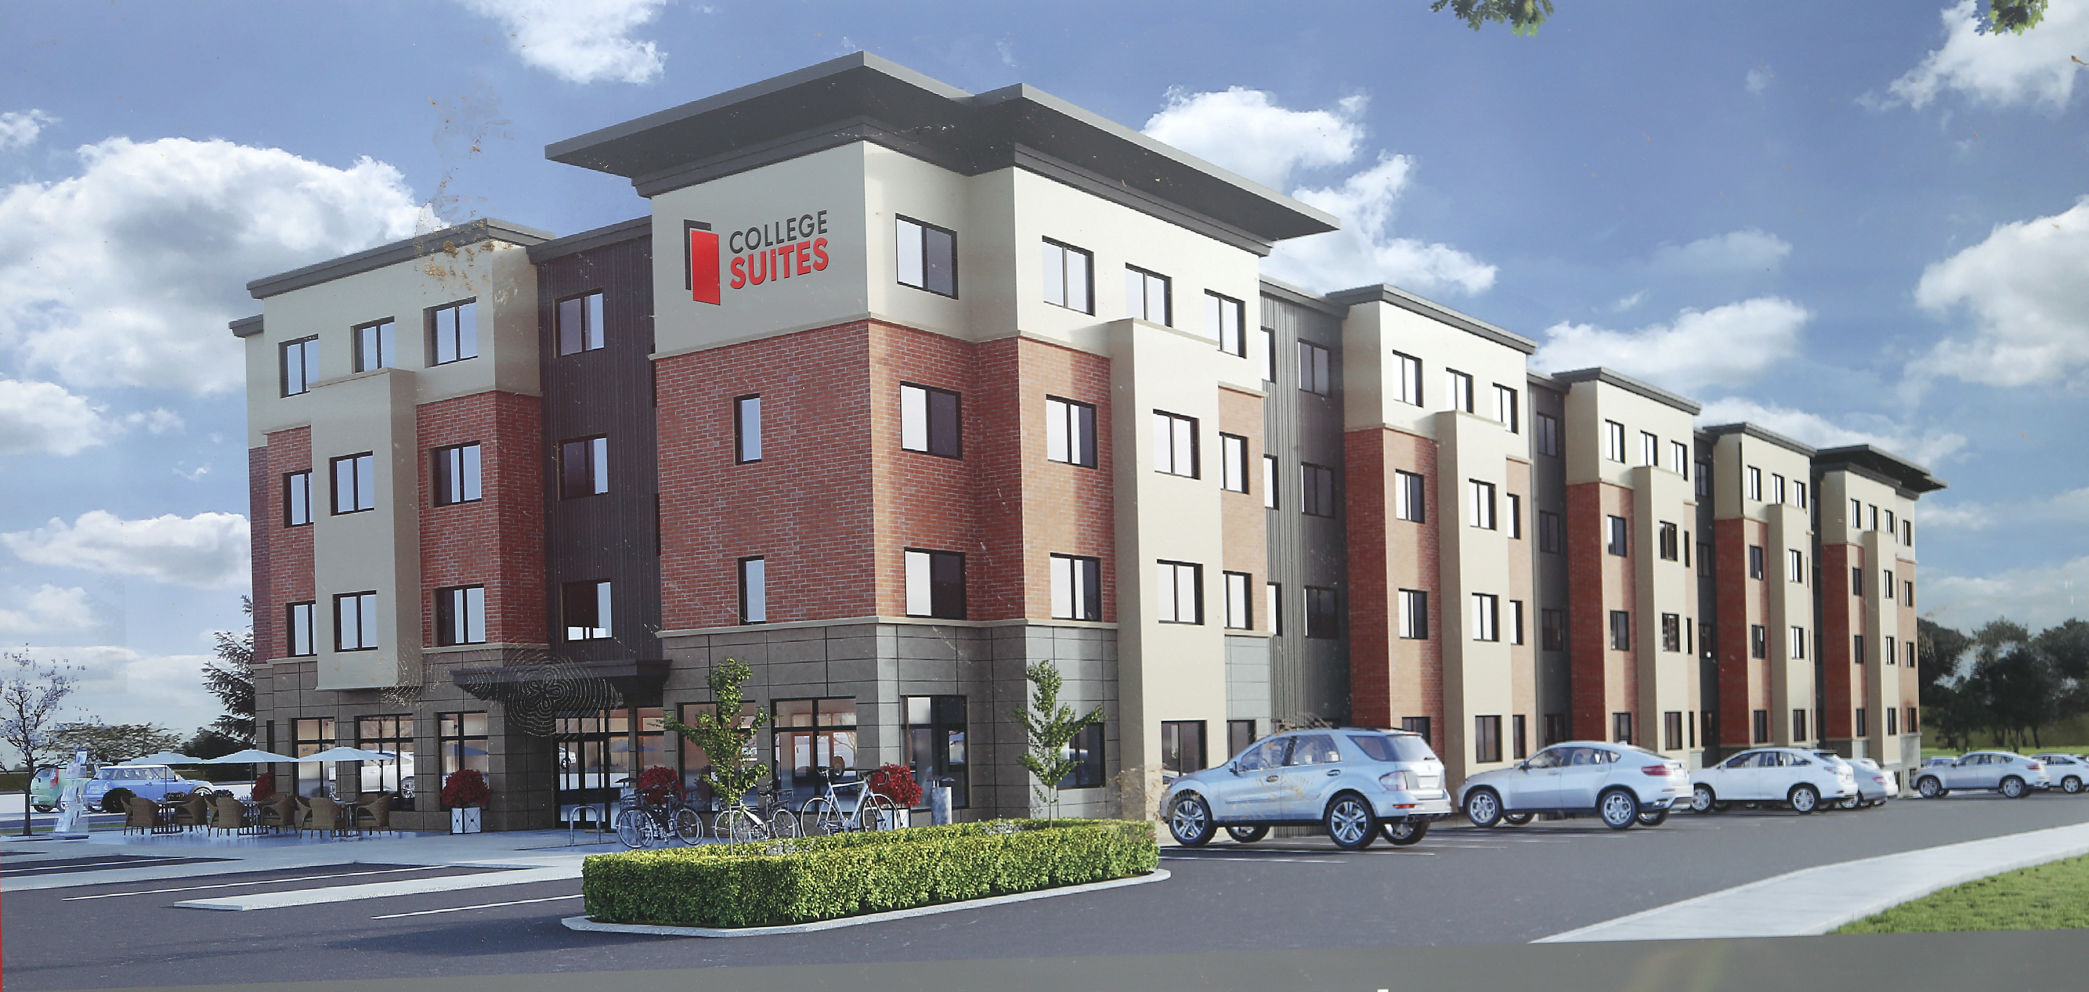 A rendering of the College Suites development to be constructed in Peosta. PHOTO CREDIT: Dave Kettering